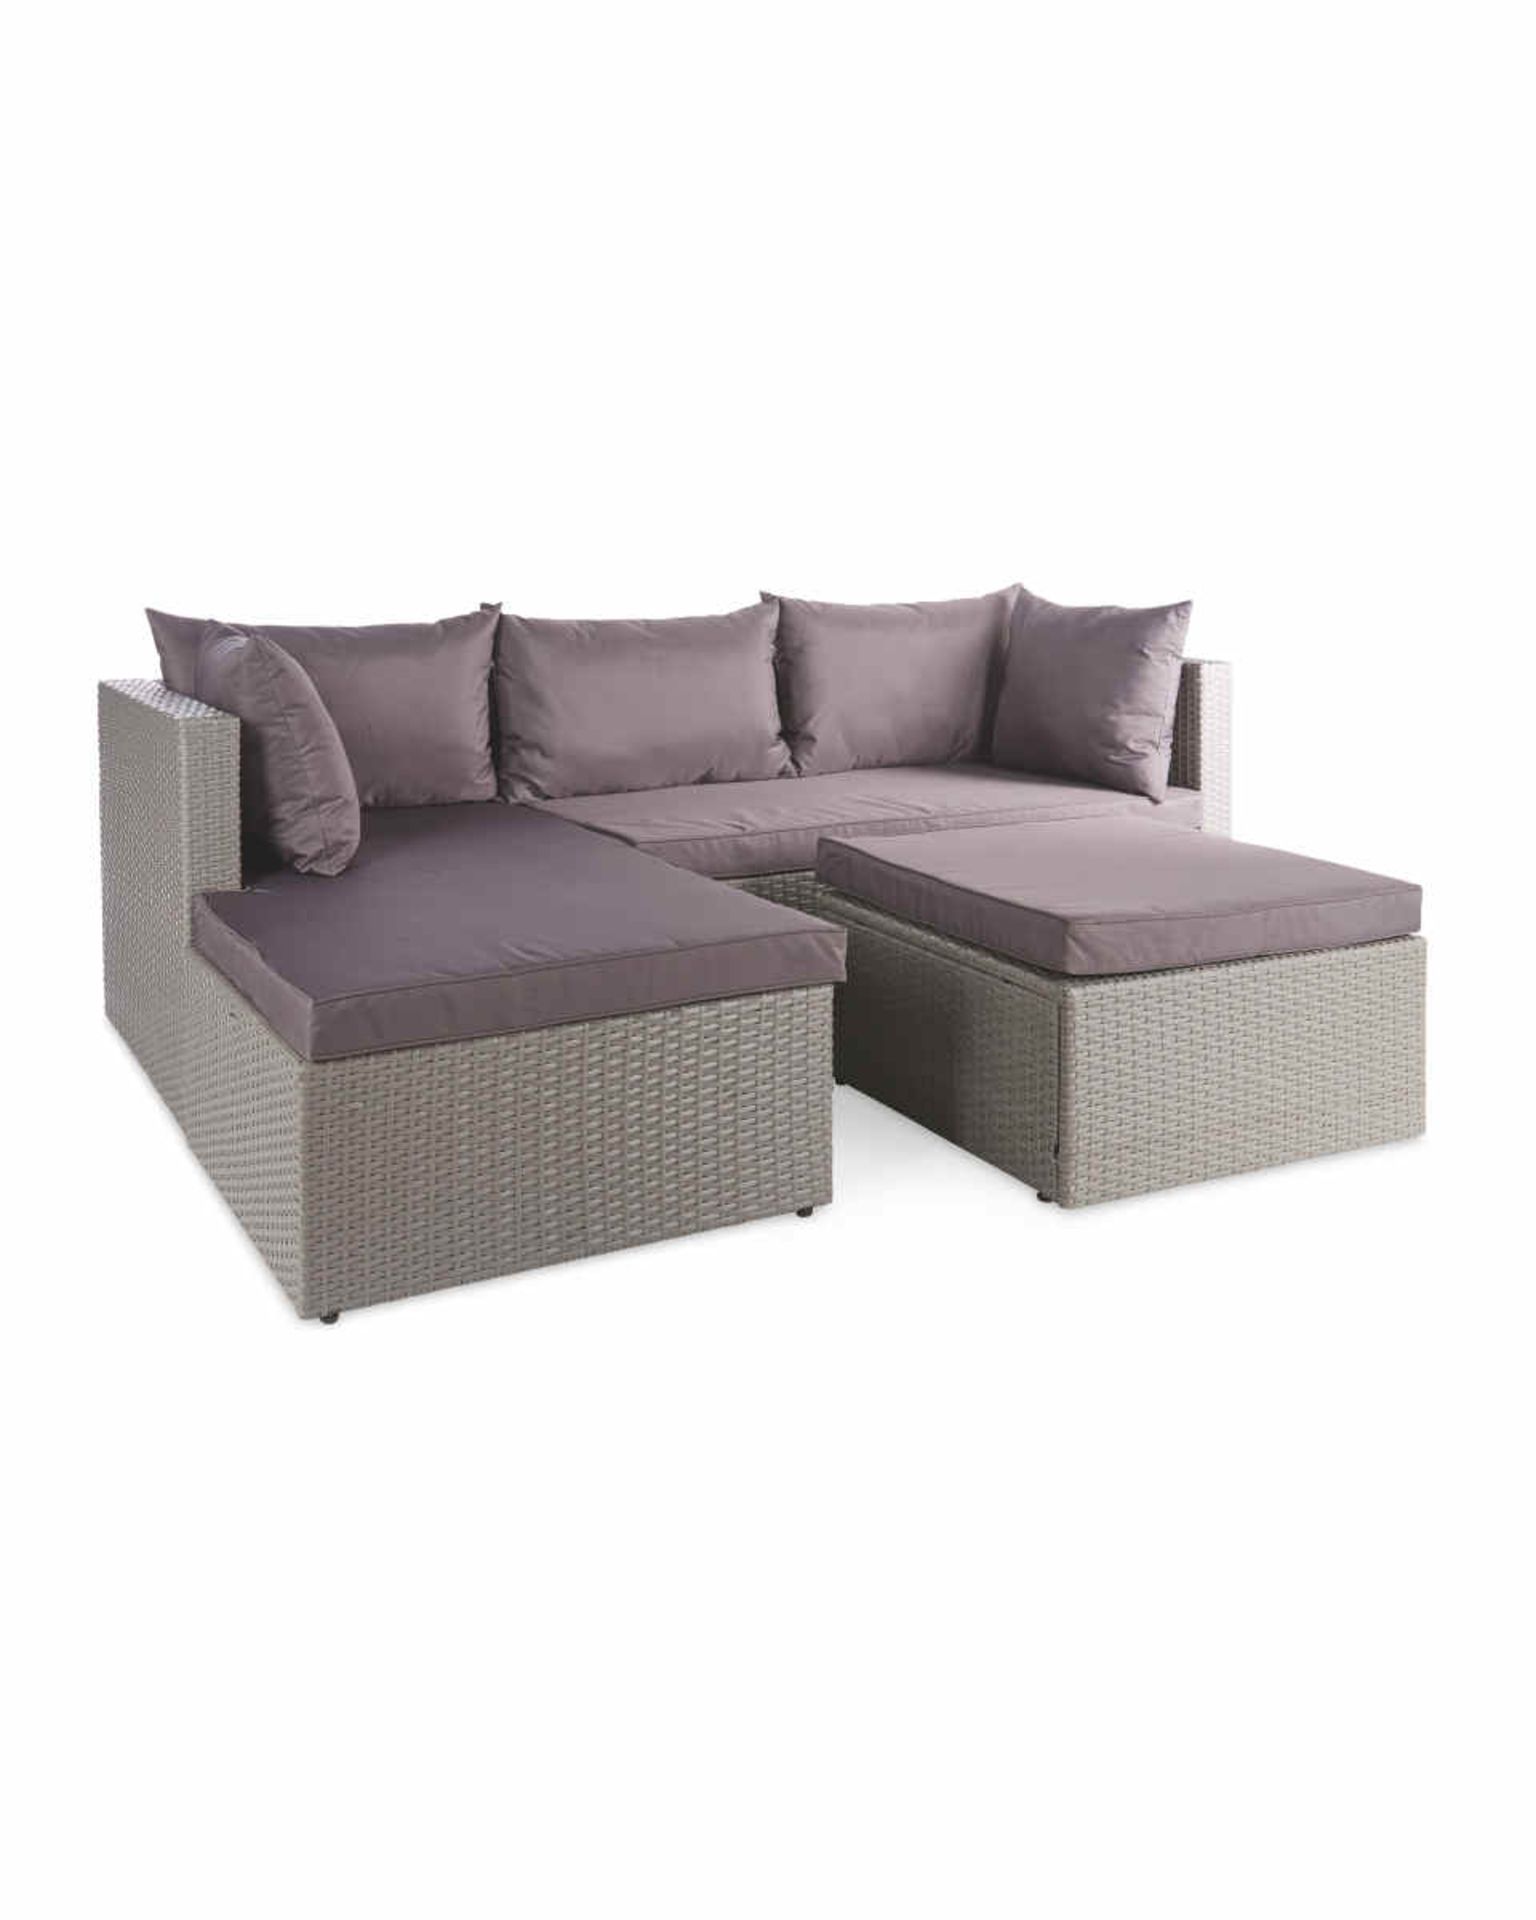 (2099212) Grey Rattan Sofa With Cover - Image 2 of 2